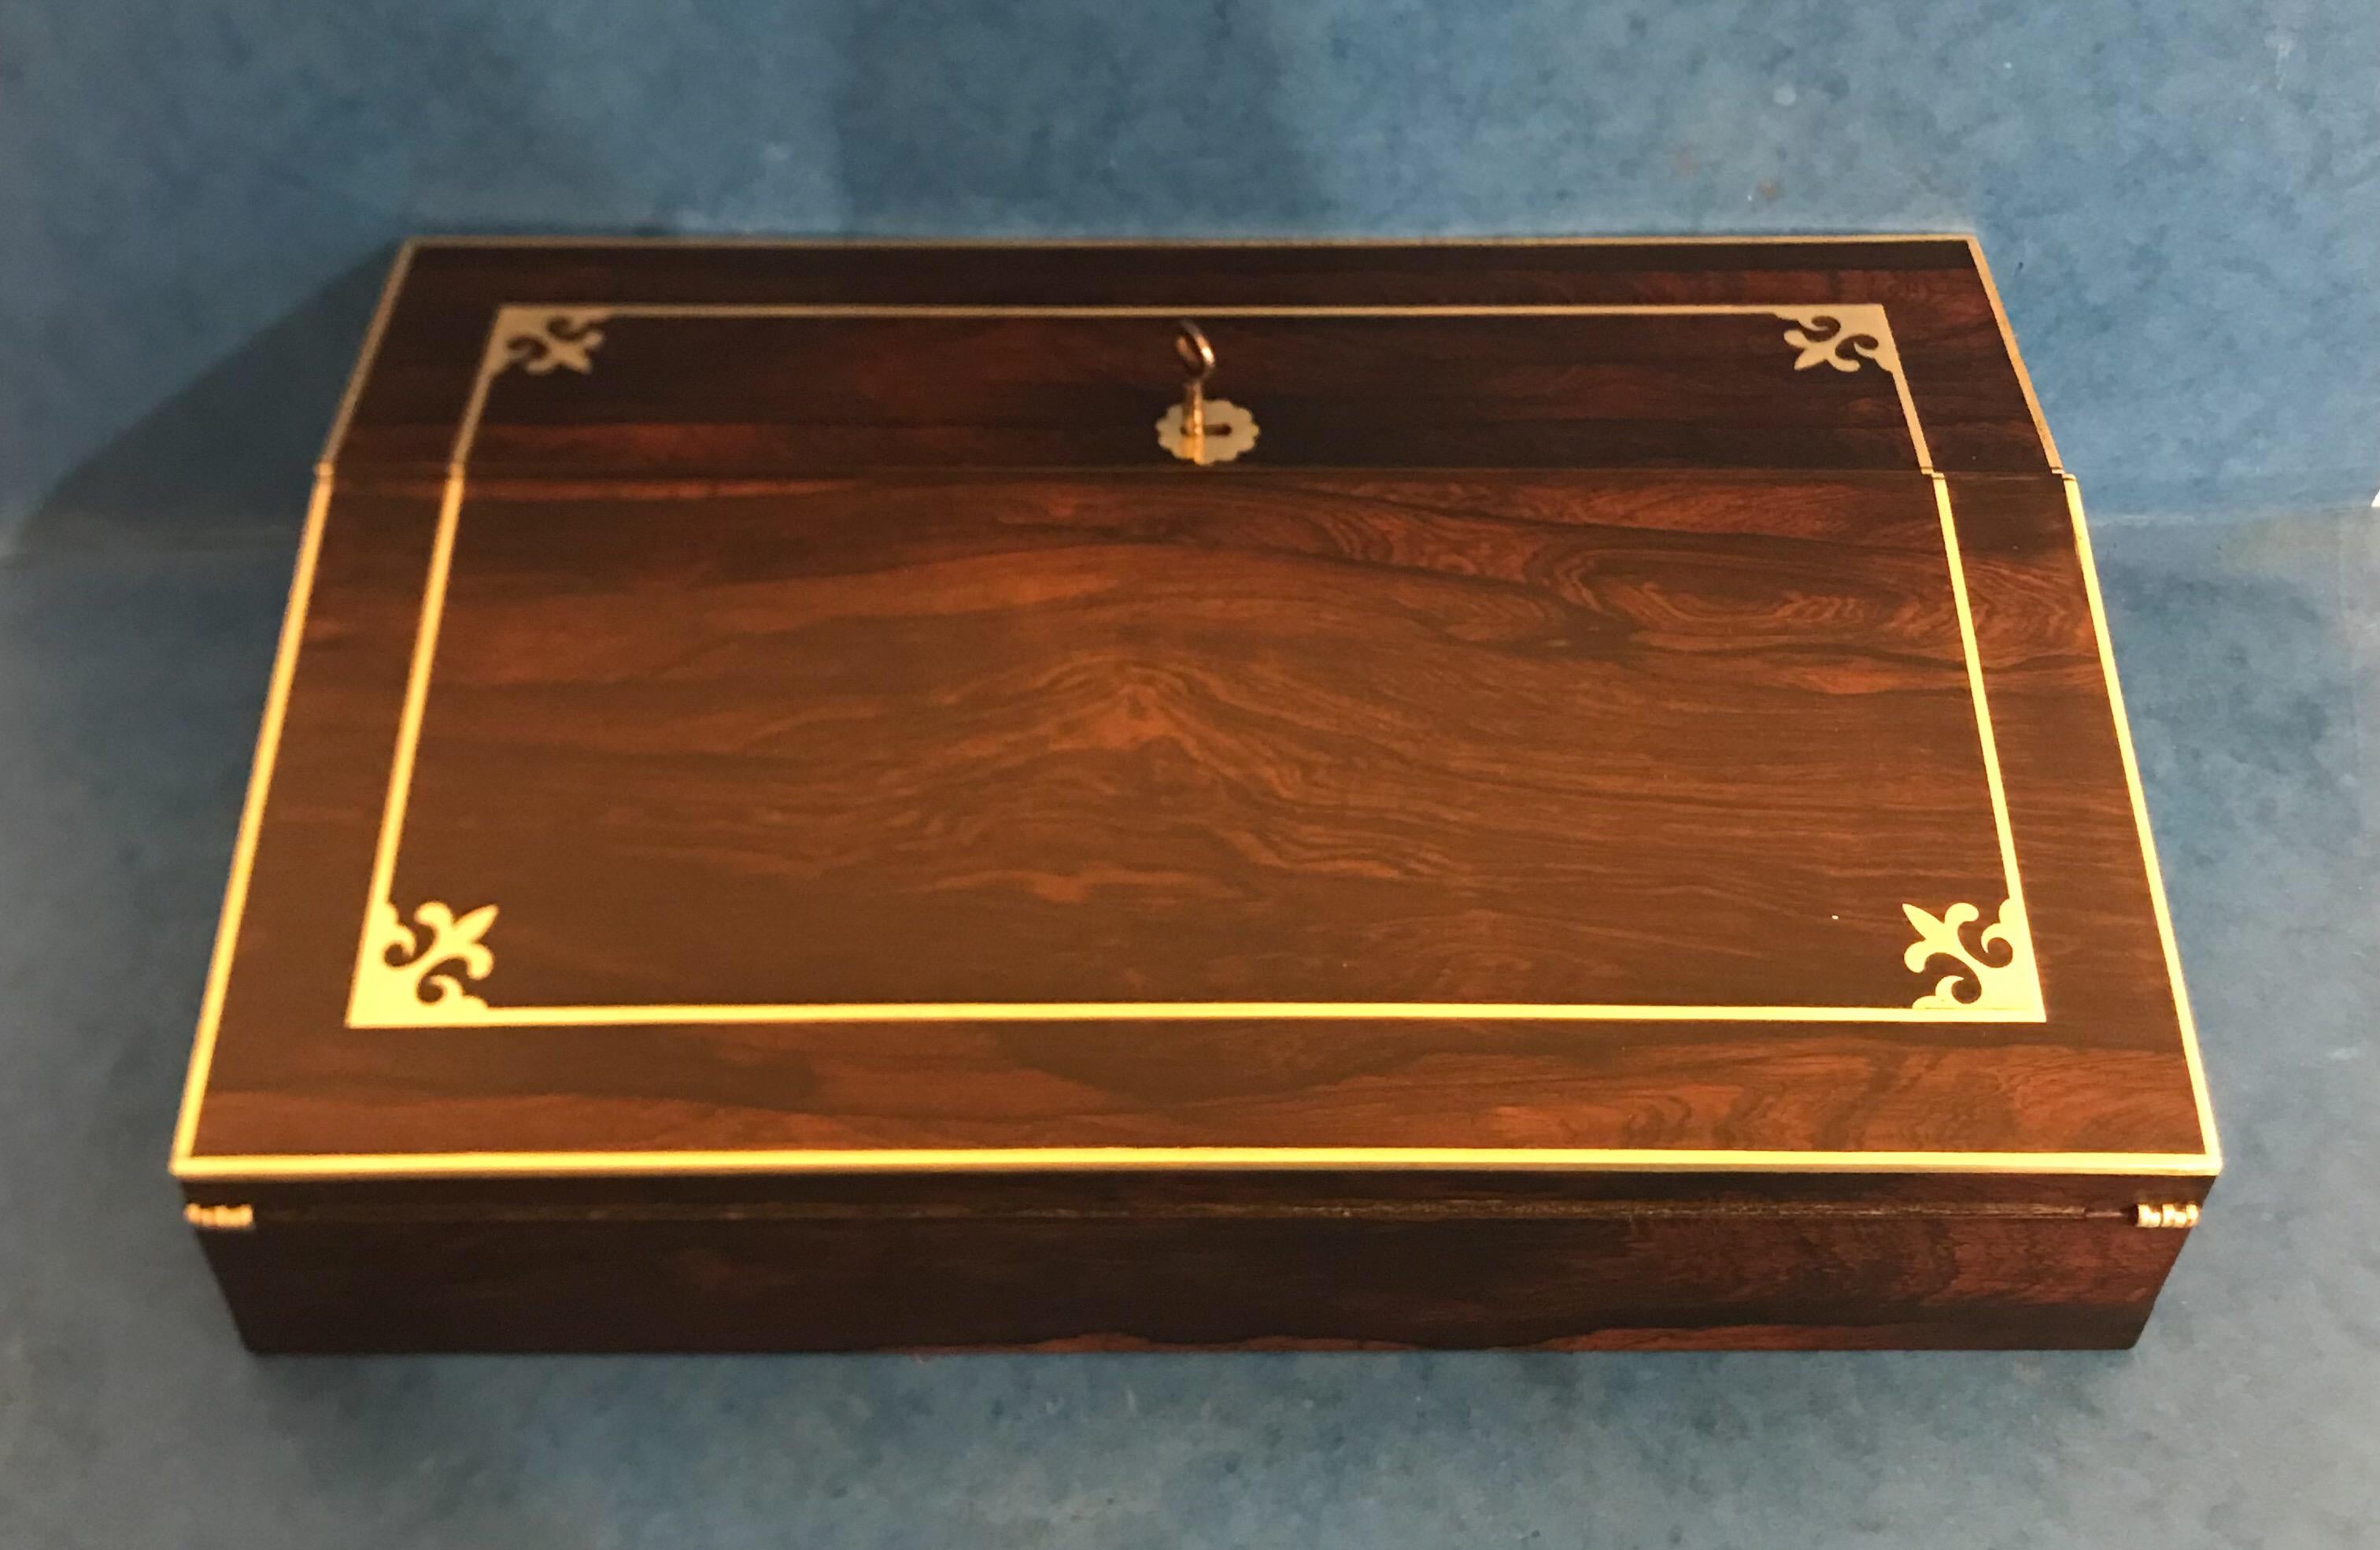 A Regency 1820 Brass inlaid rosewood lap desk, with inset brass handles, are leathered writing surface and two original ink wells, it has a stationary rack to the interior and various lidded compartments for nibs and pens, unfortunately the lock